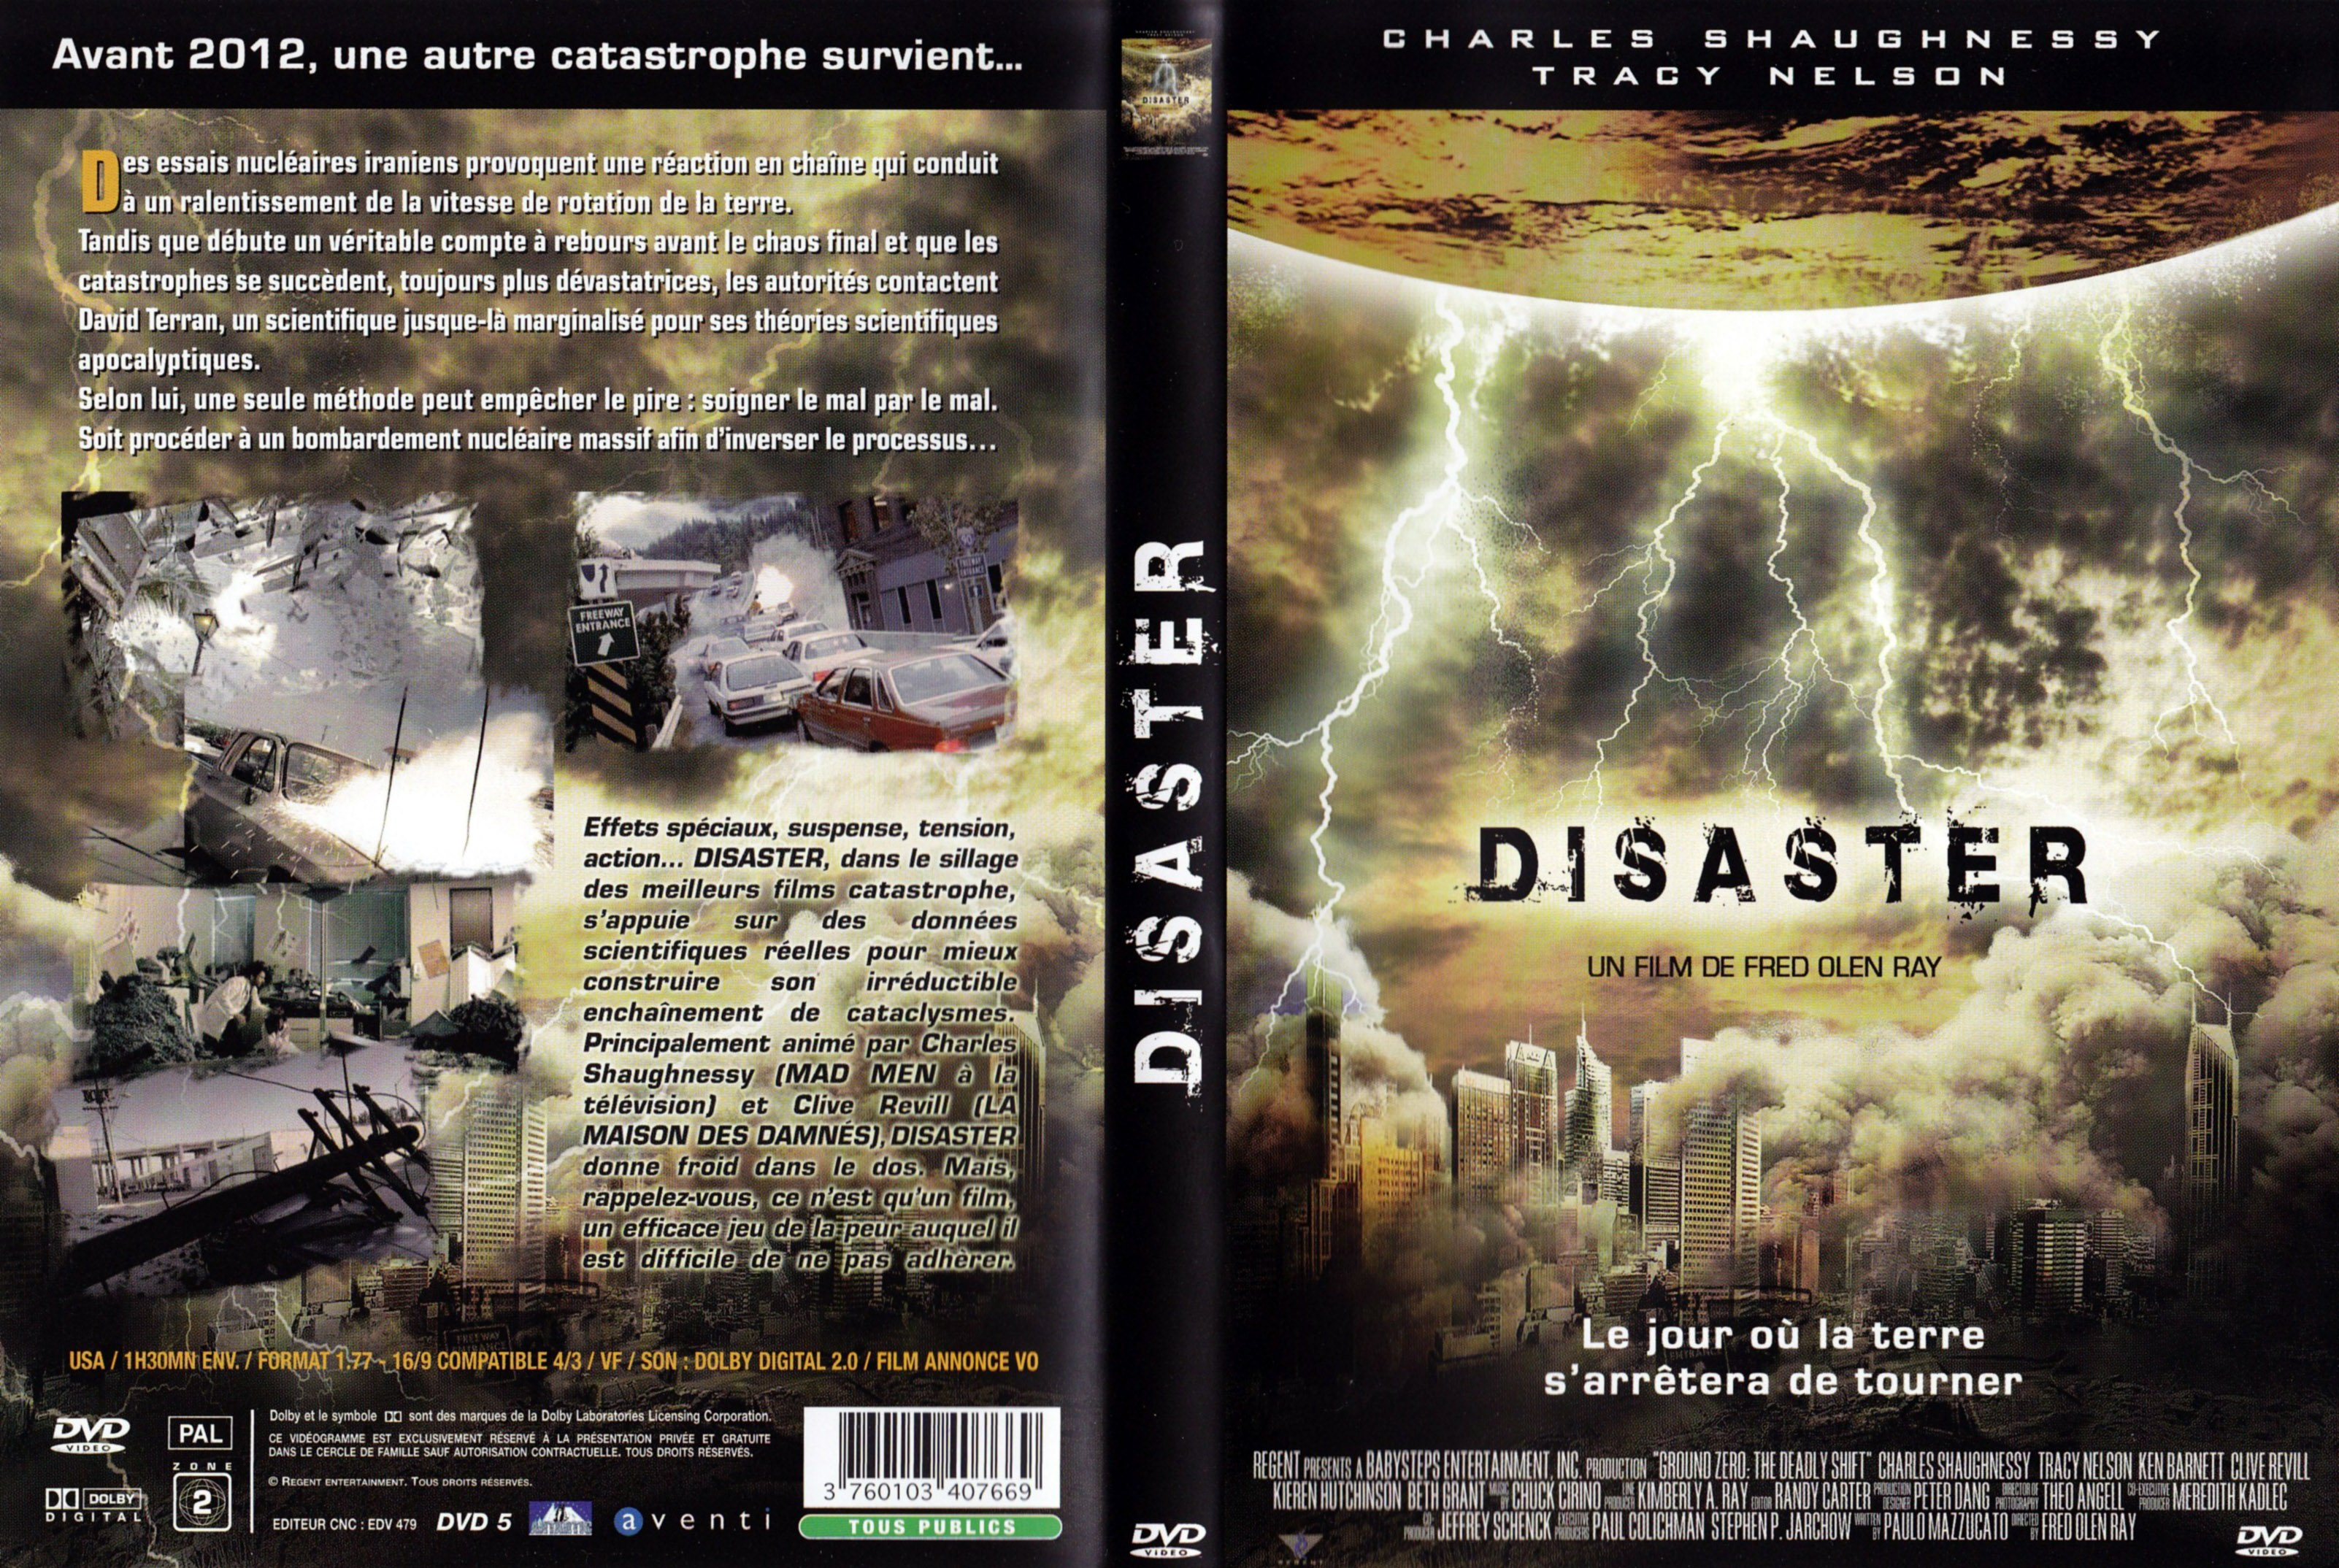 Jaquette DVD Disaster